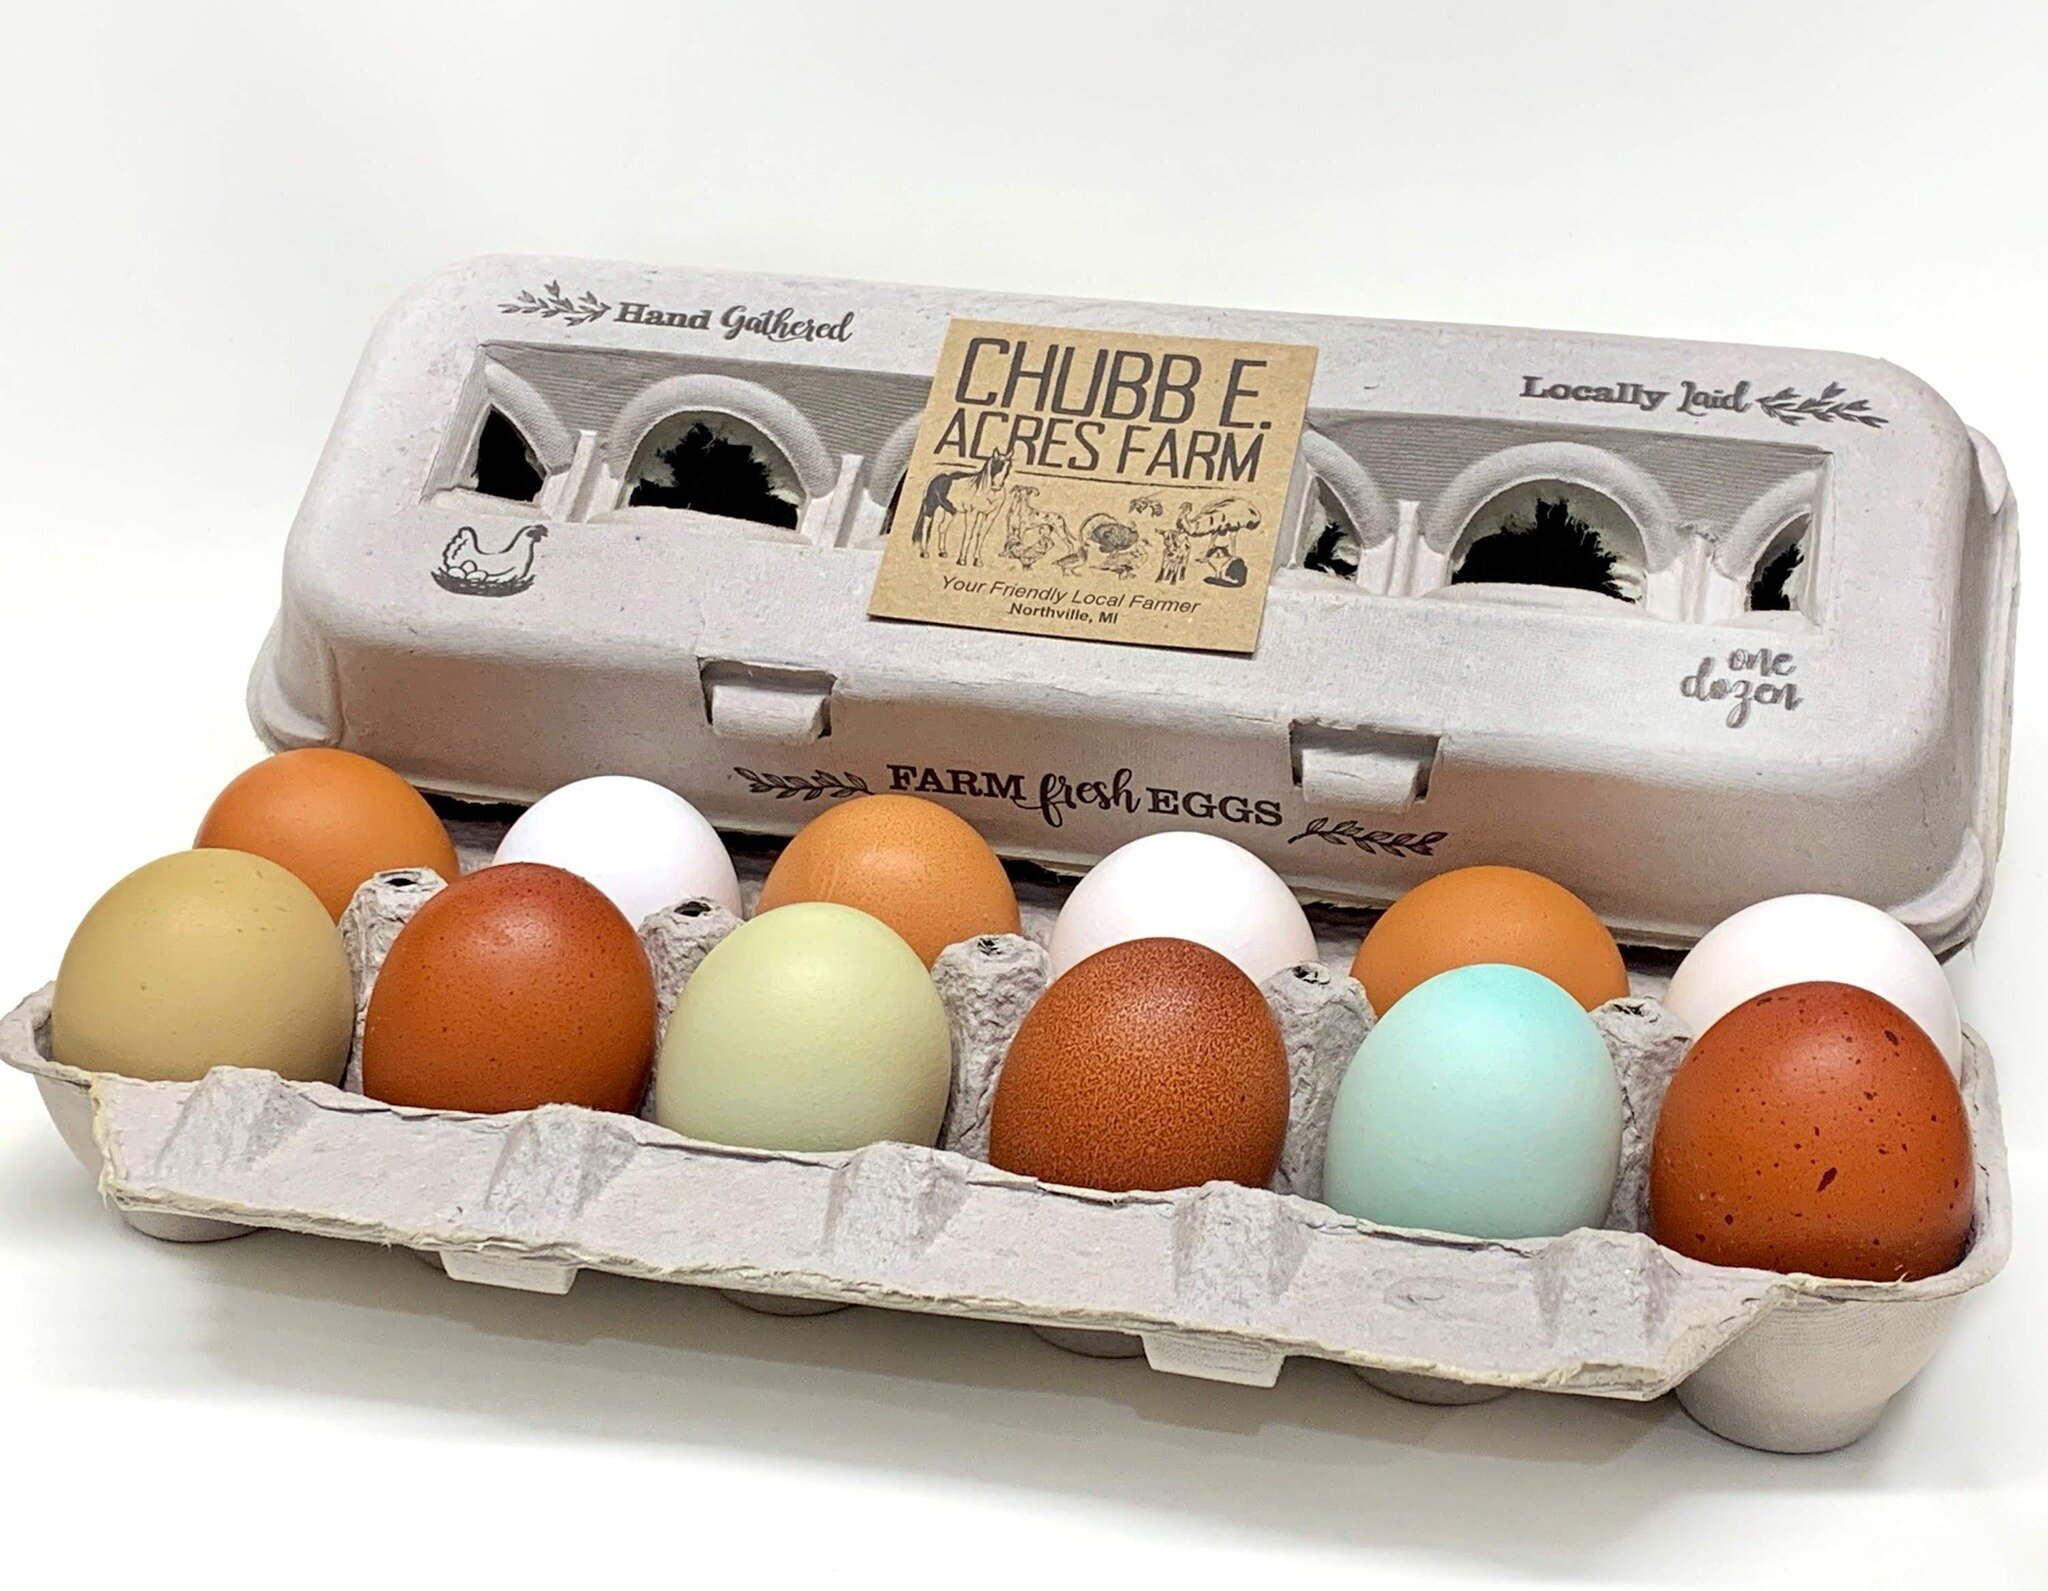 EGGS ARE BACK IN STOCK!!! 
GET THEM WHILE SUPPLIES LAST : ) 

https://app.barn2door.com/chubbeacresfarm/all